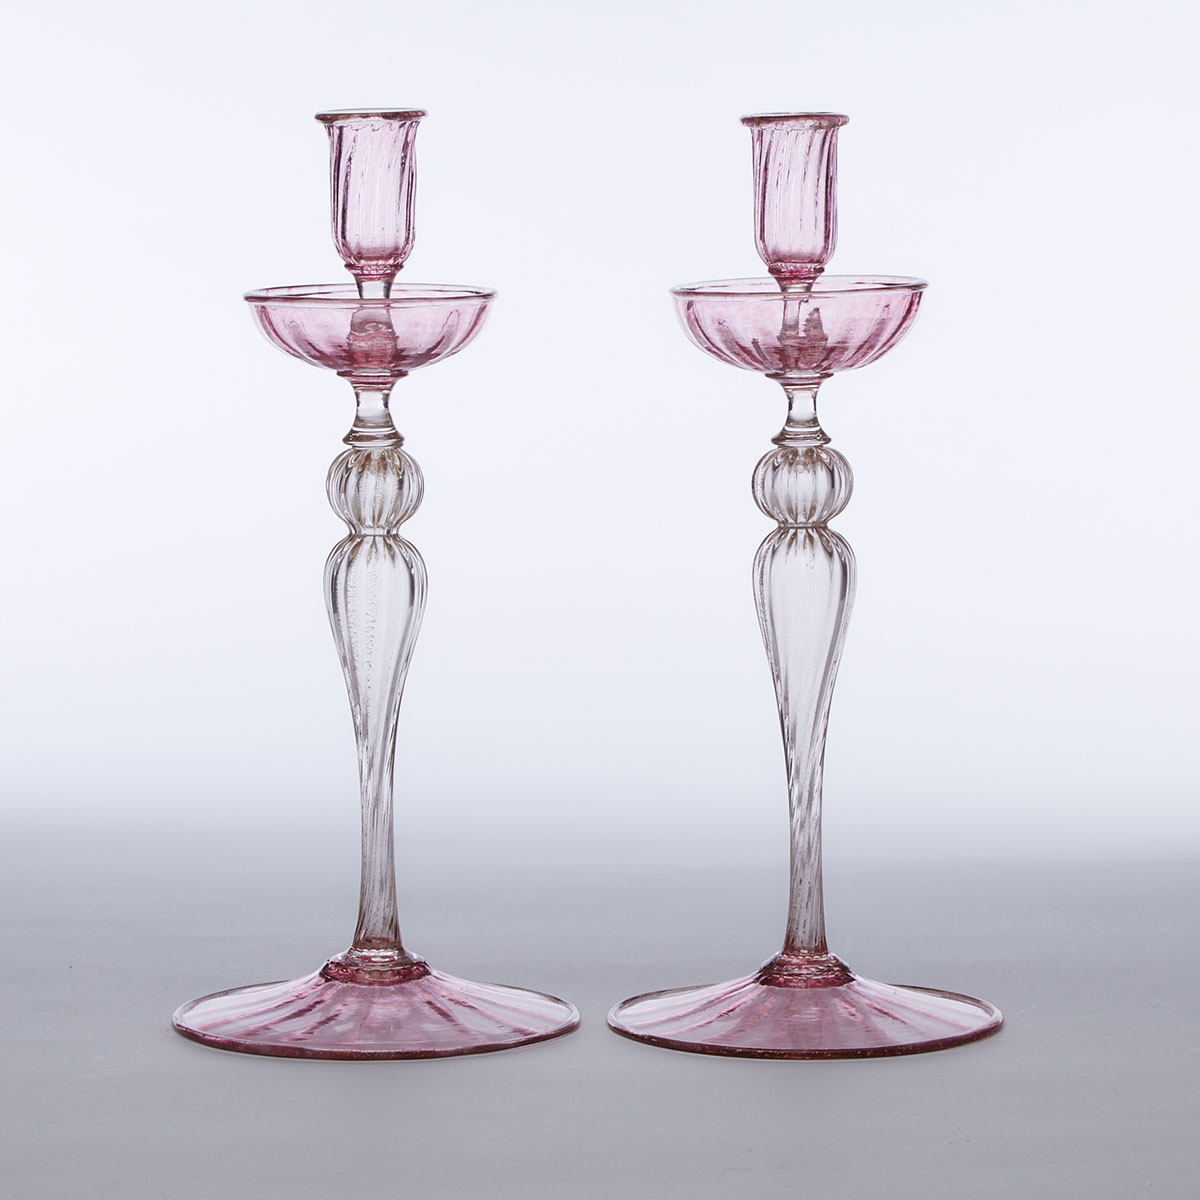 Pair of Venetian Pink and Gilt Glass Table Candlesticks, early 20th century